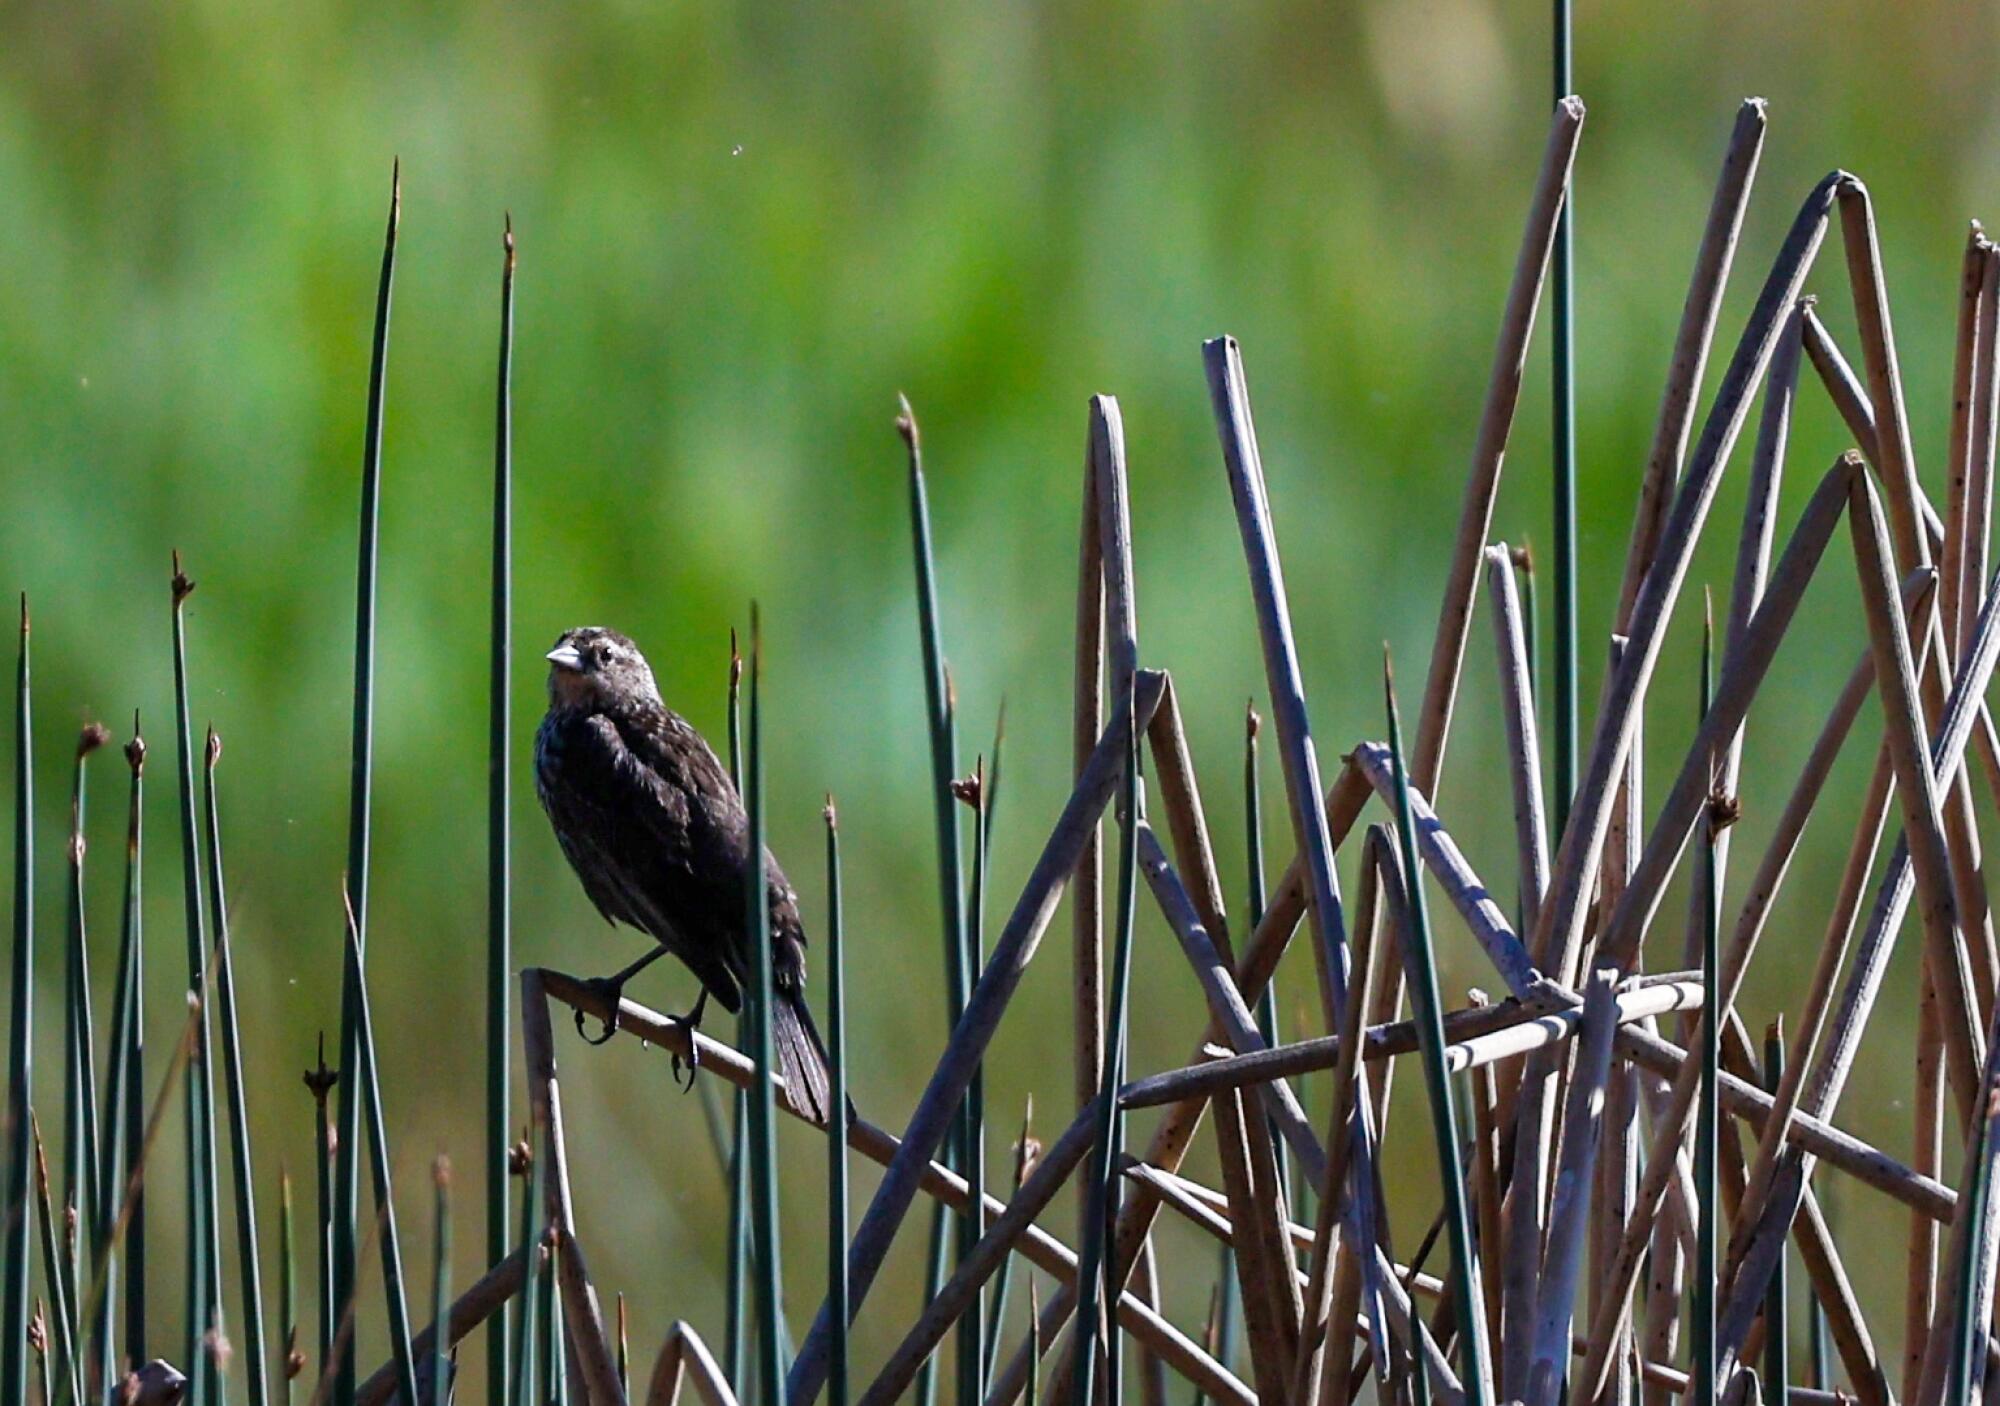 A small bird perches on a reed in a wetland.